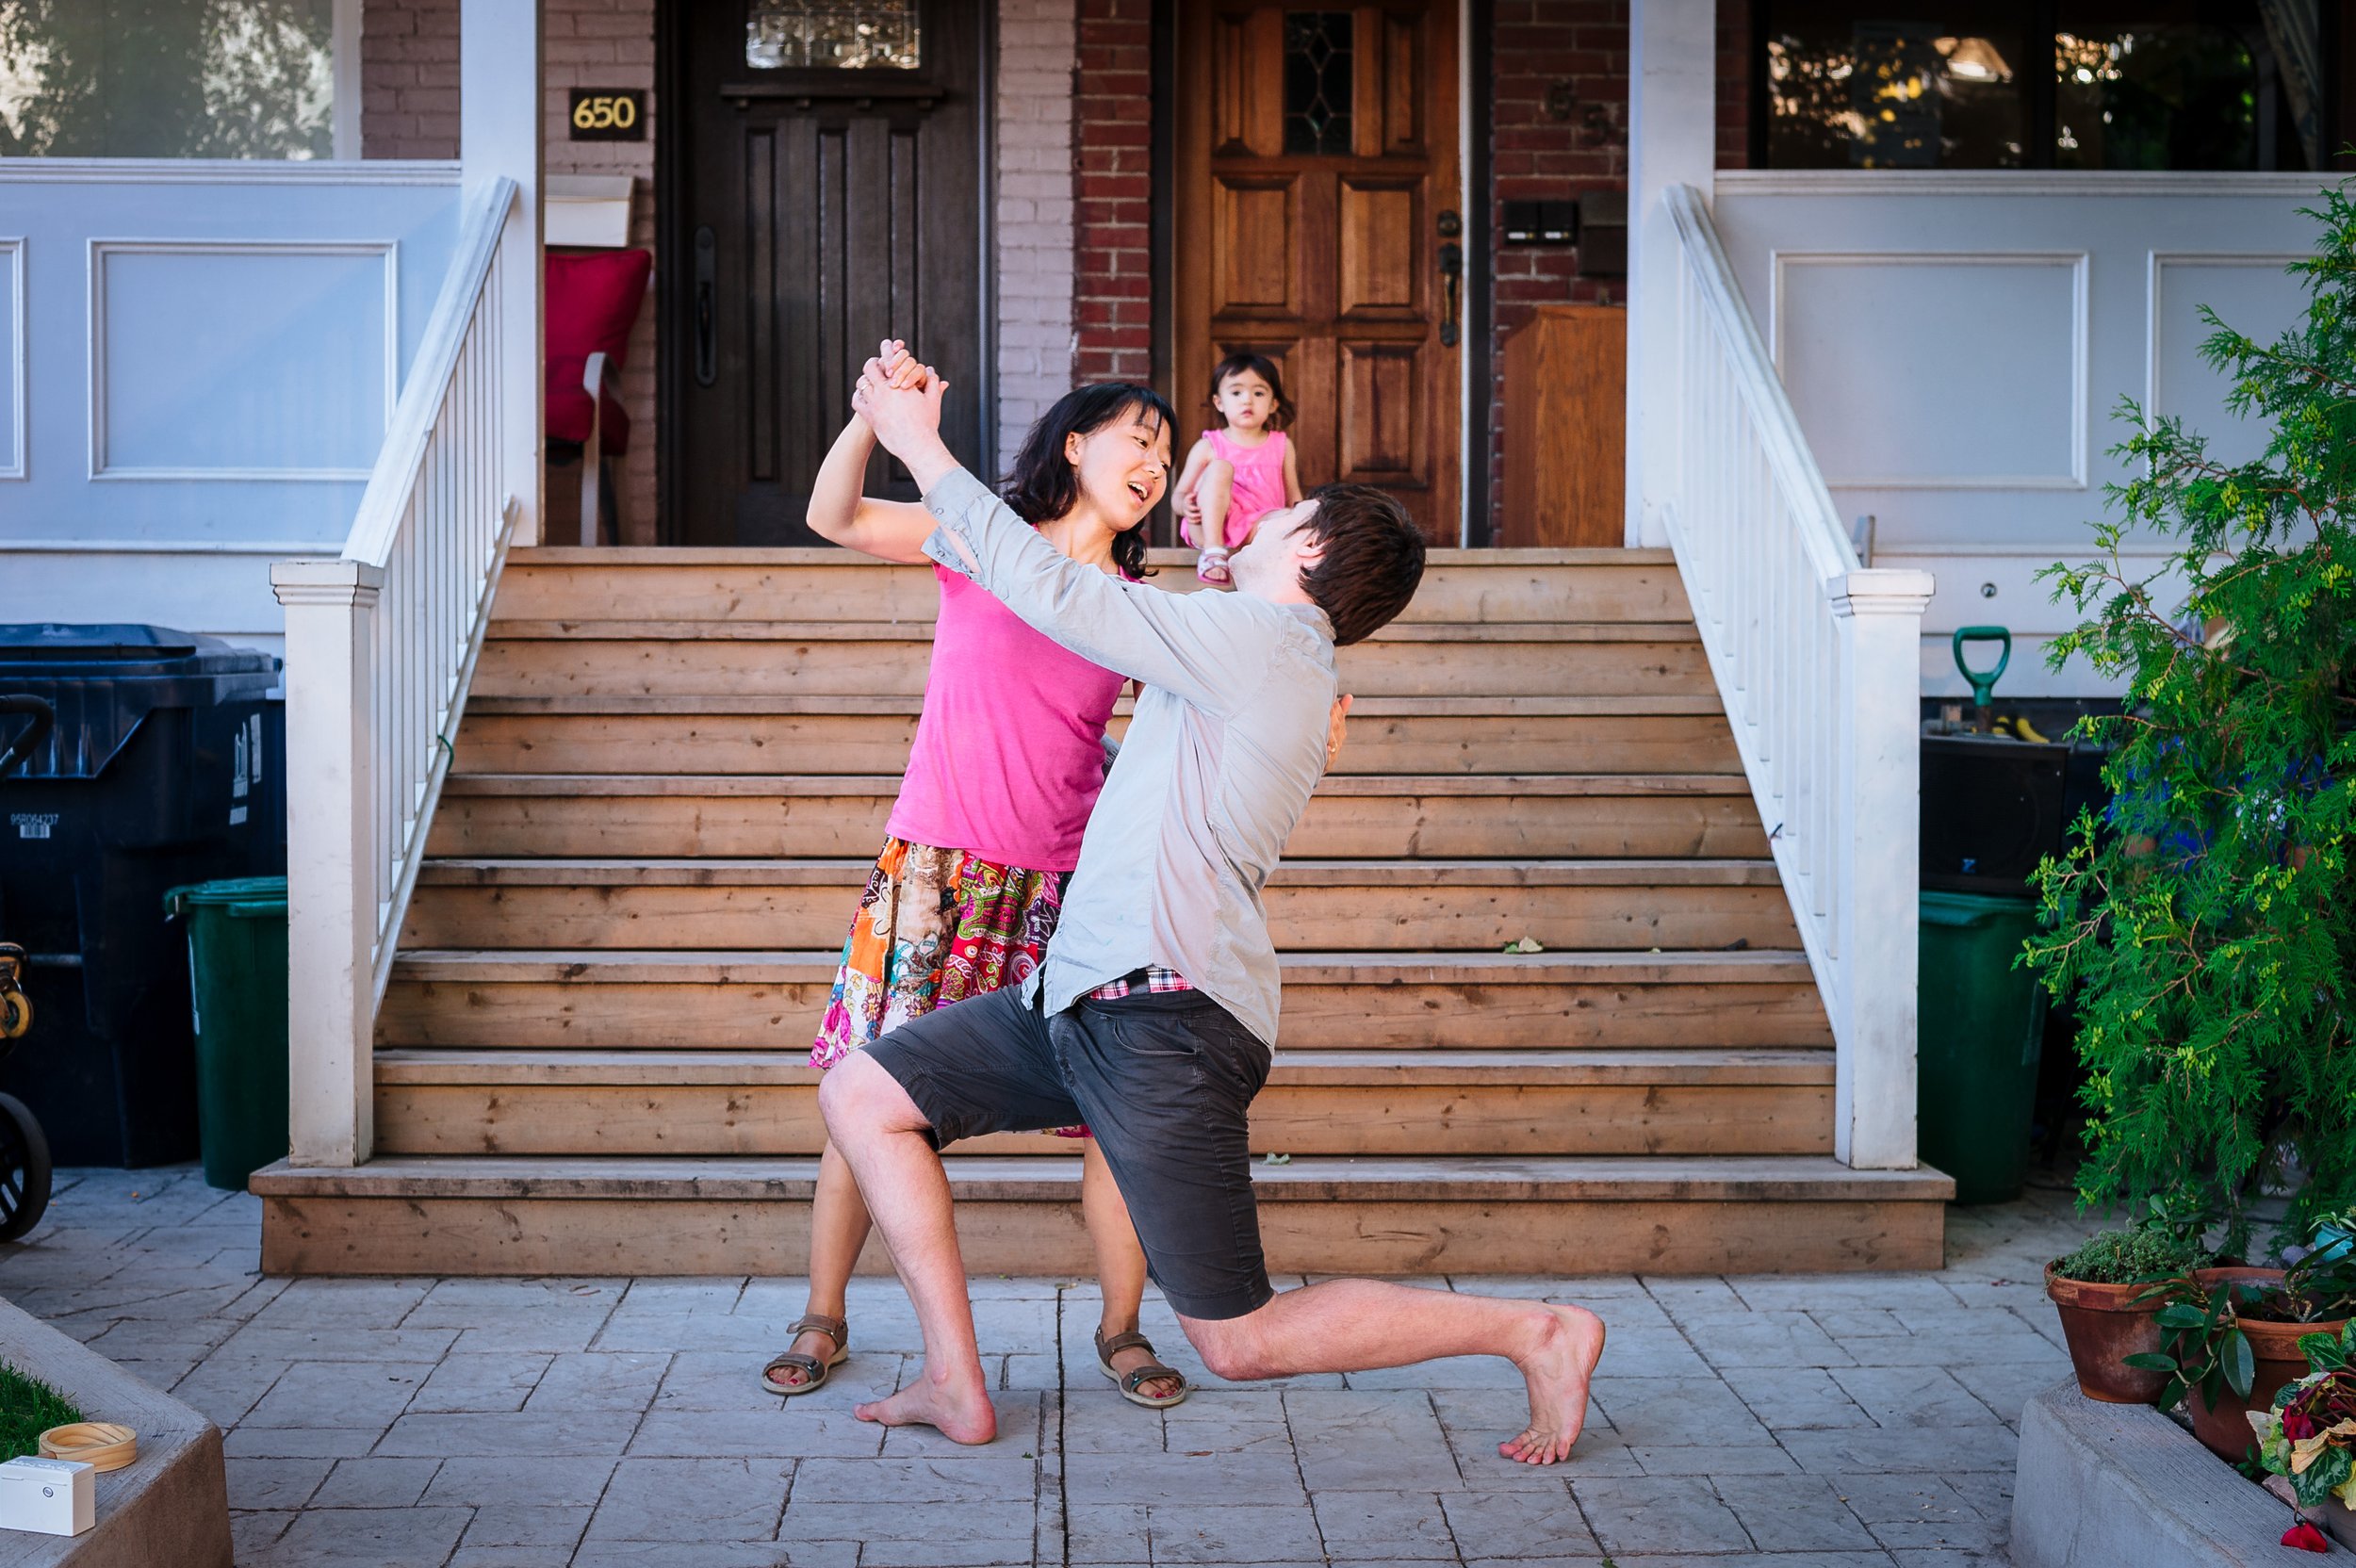 Couple doing the tango in front of daughter who watches from the porch stairs